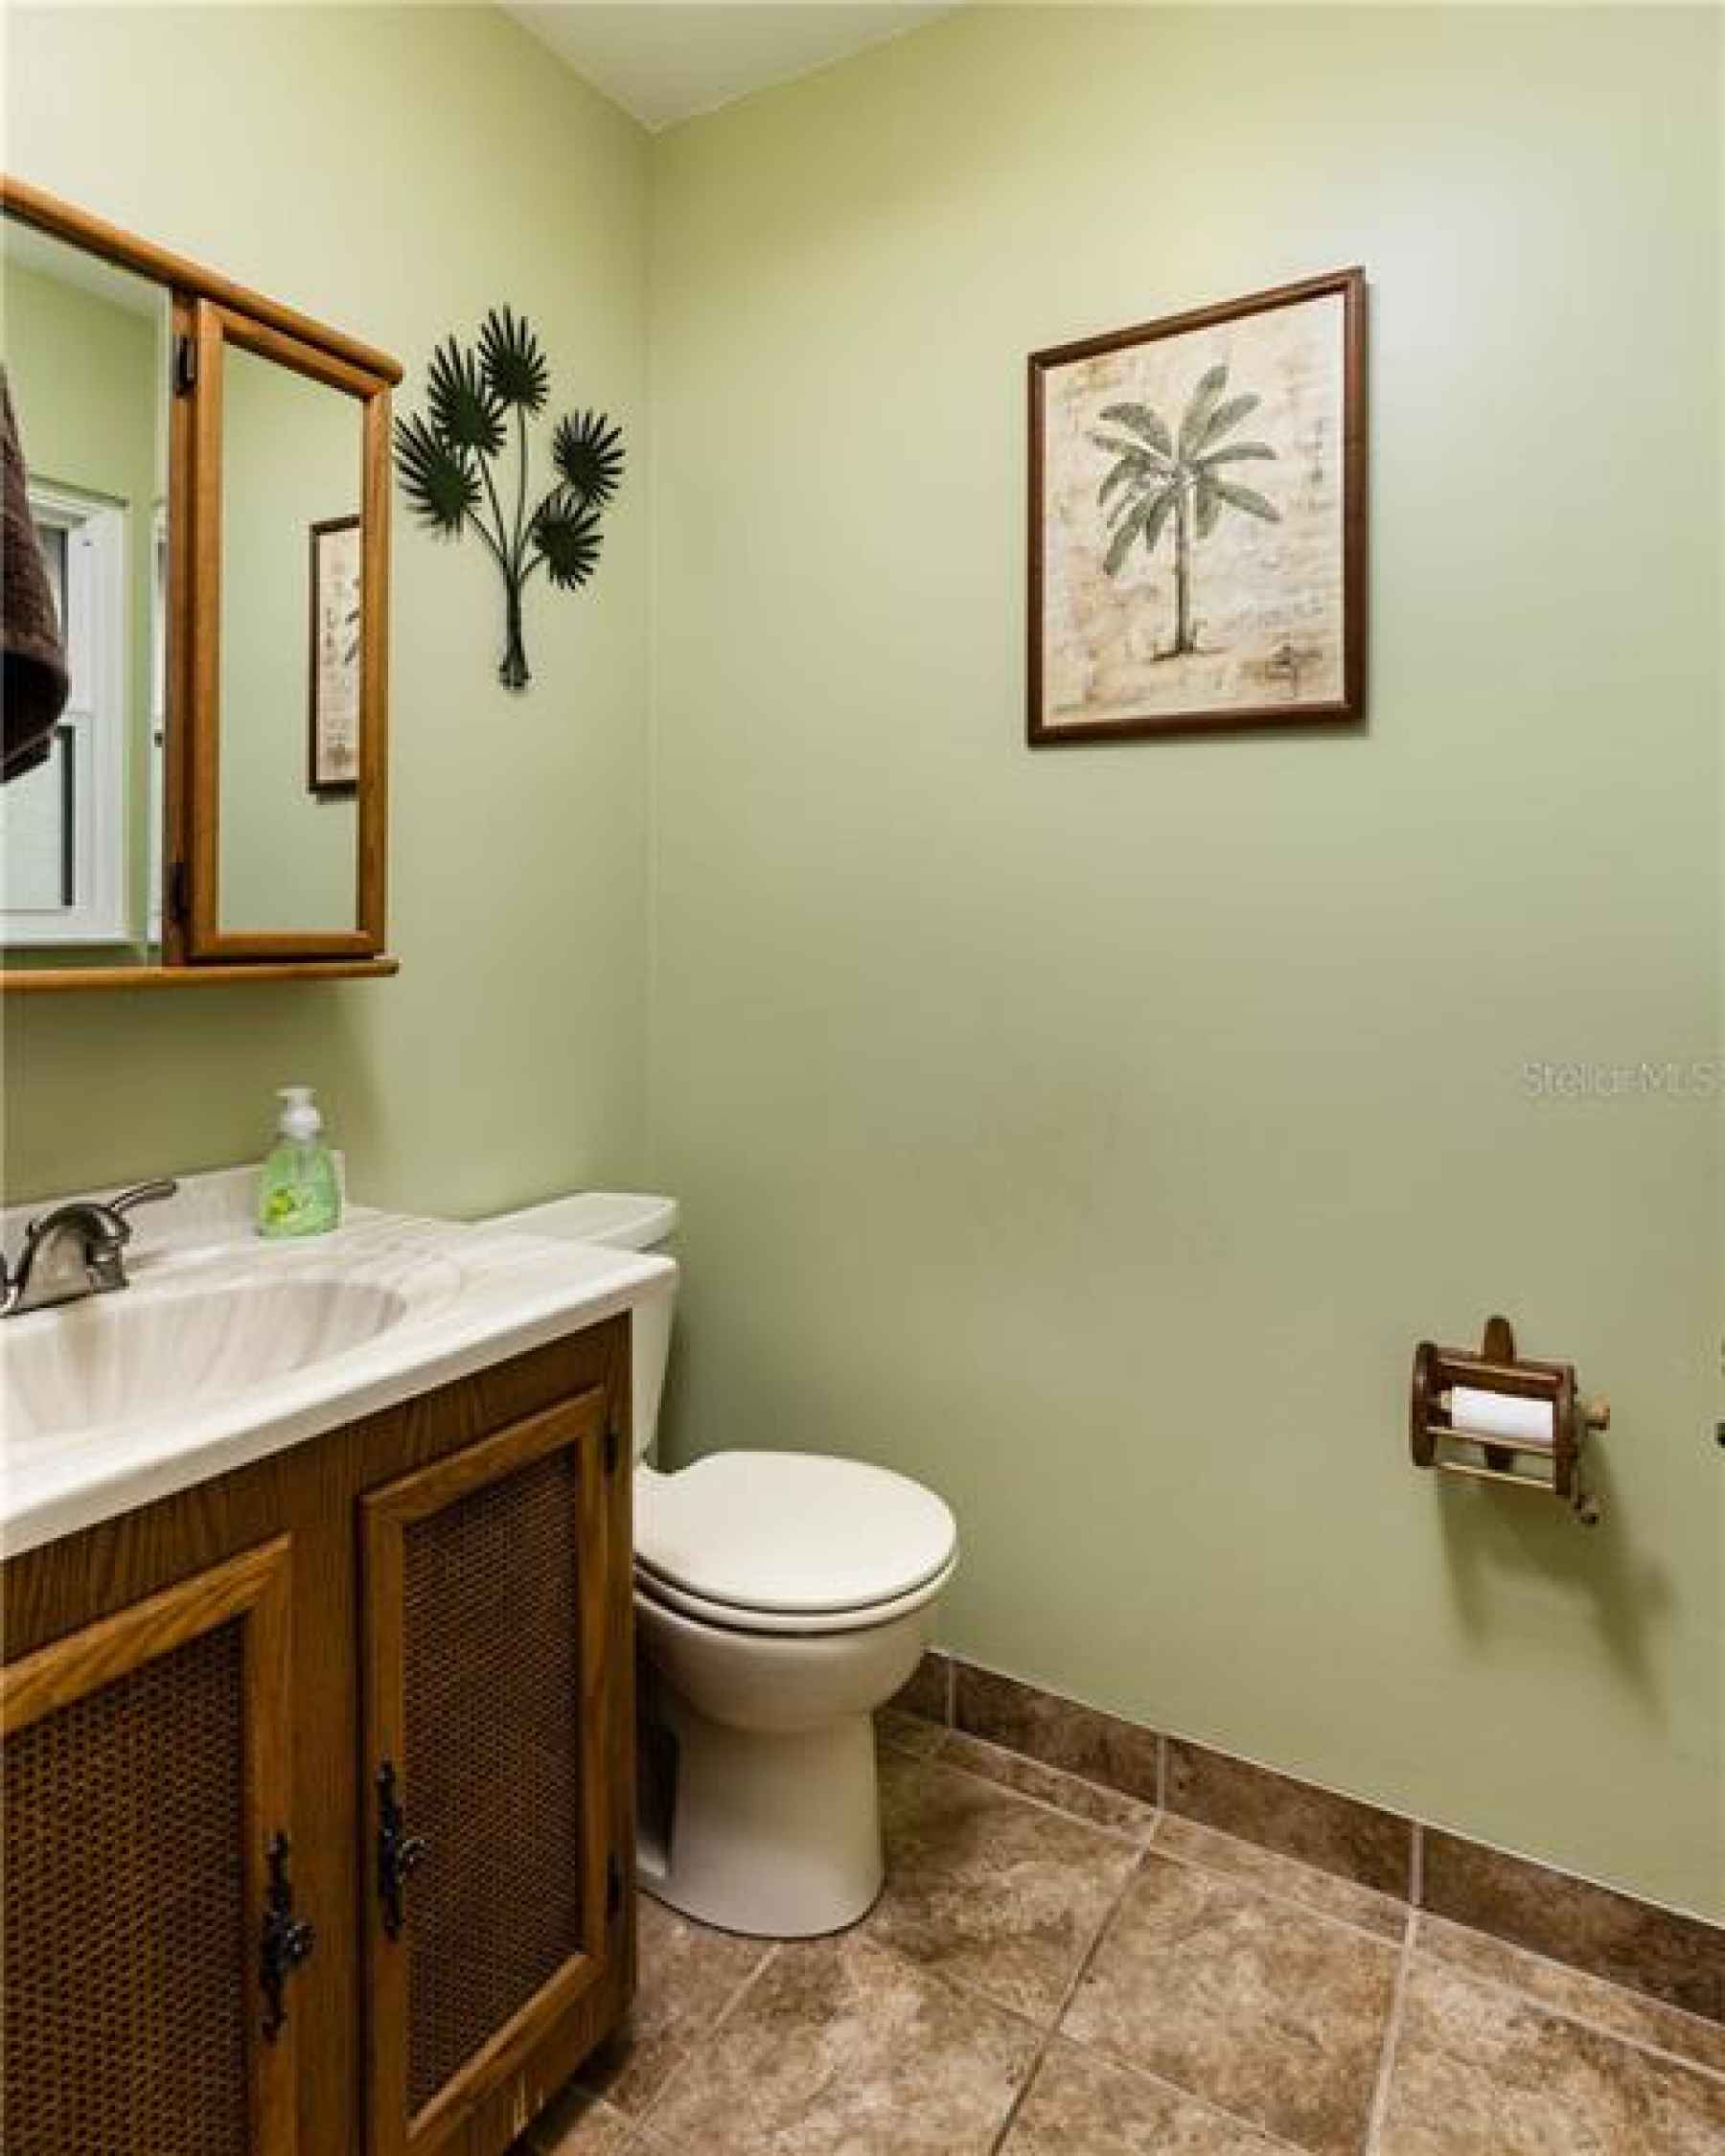 1/2 bath at front of the house